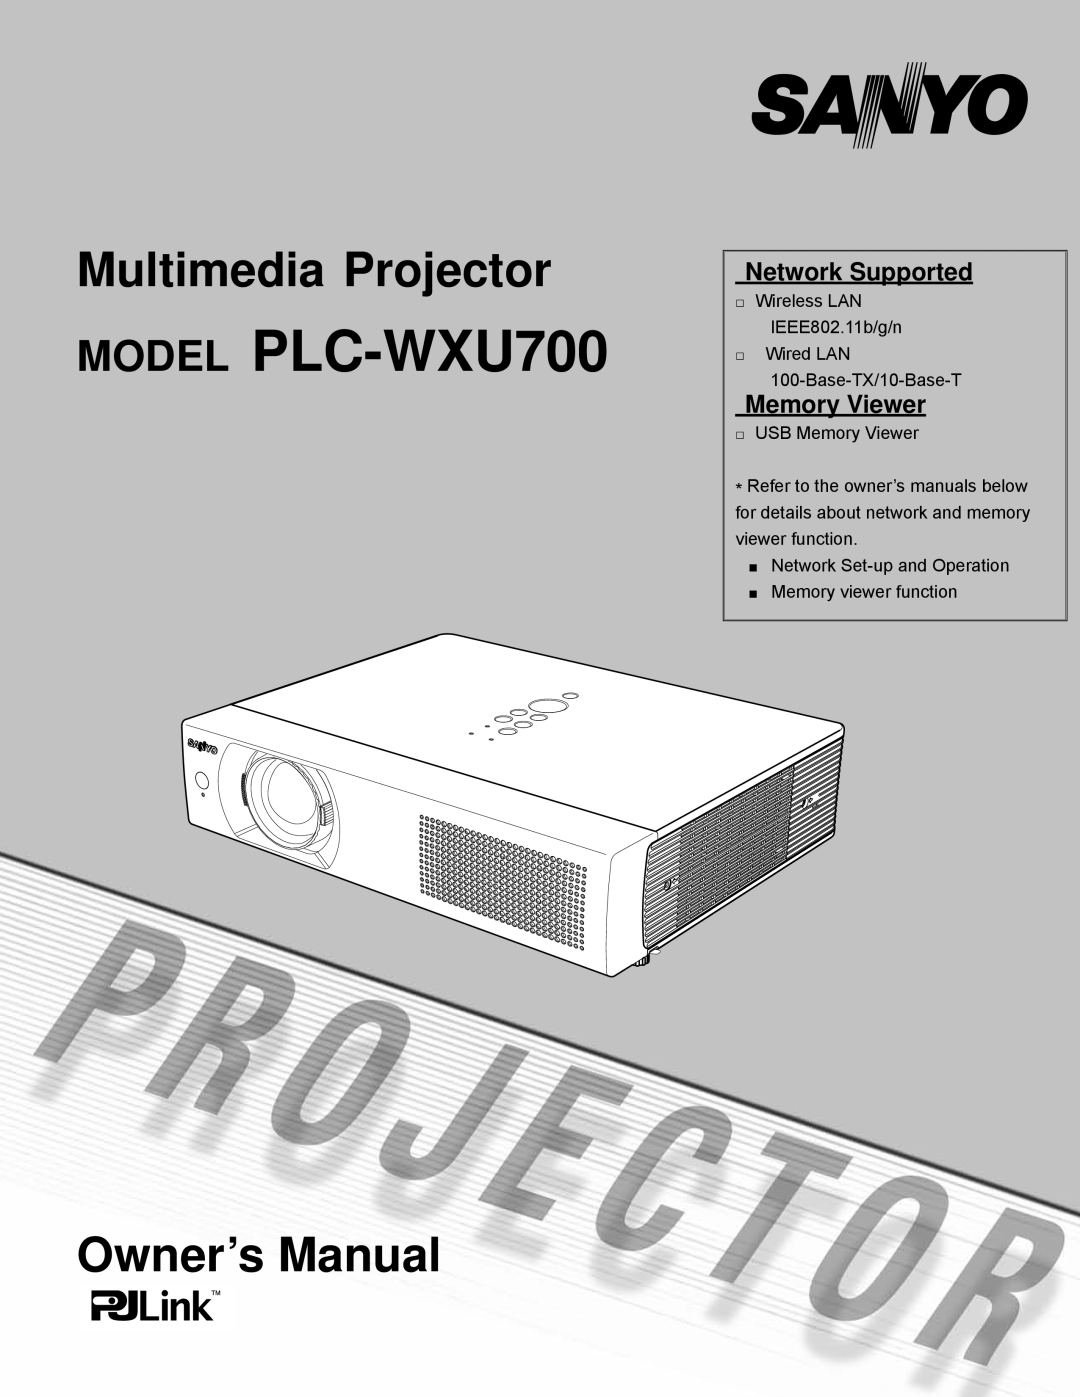 Sanyo owner manual Network Supported, Memory Viewer, MODEL PLC-WXU700, Multimedia Projector, Owner’s Manual 